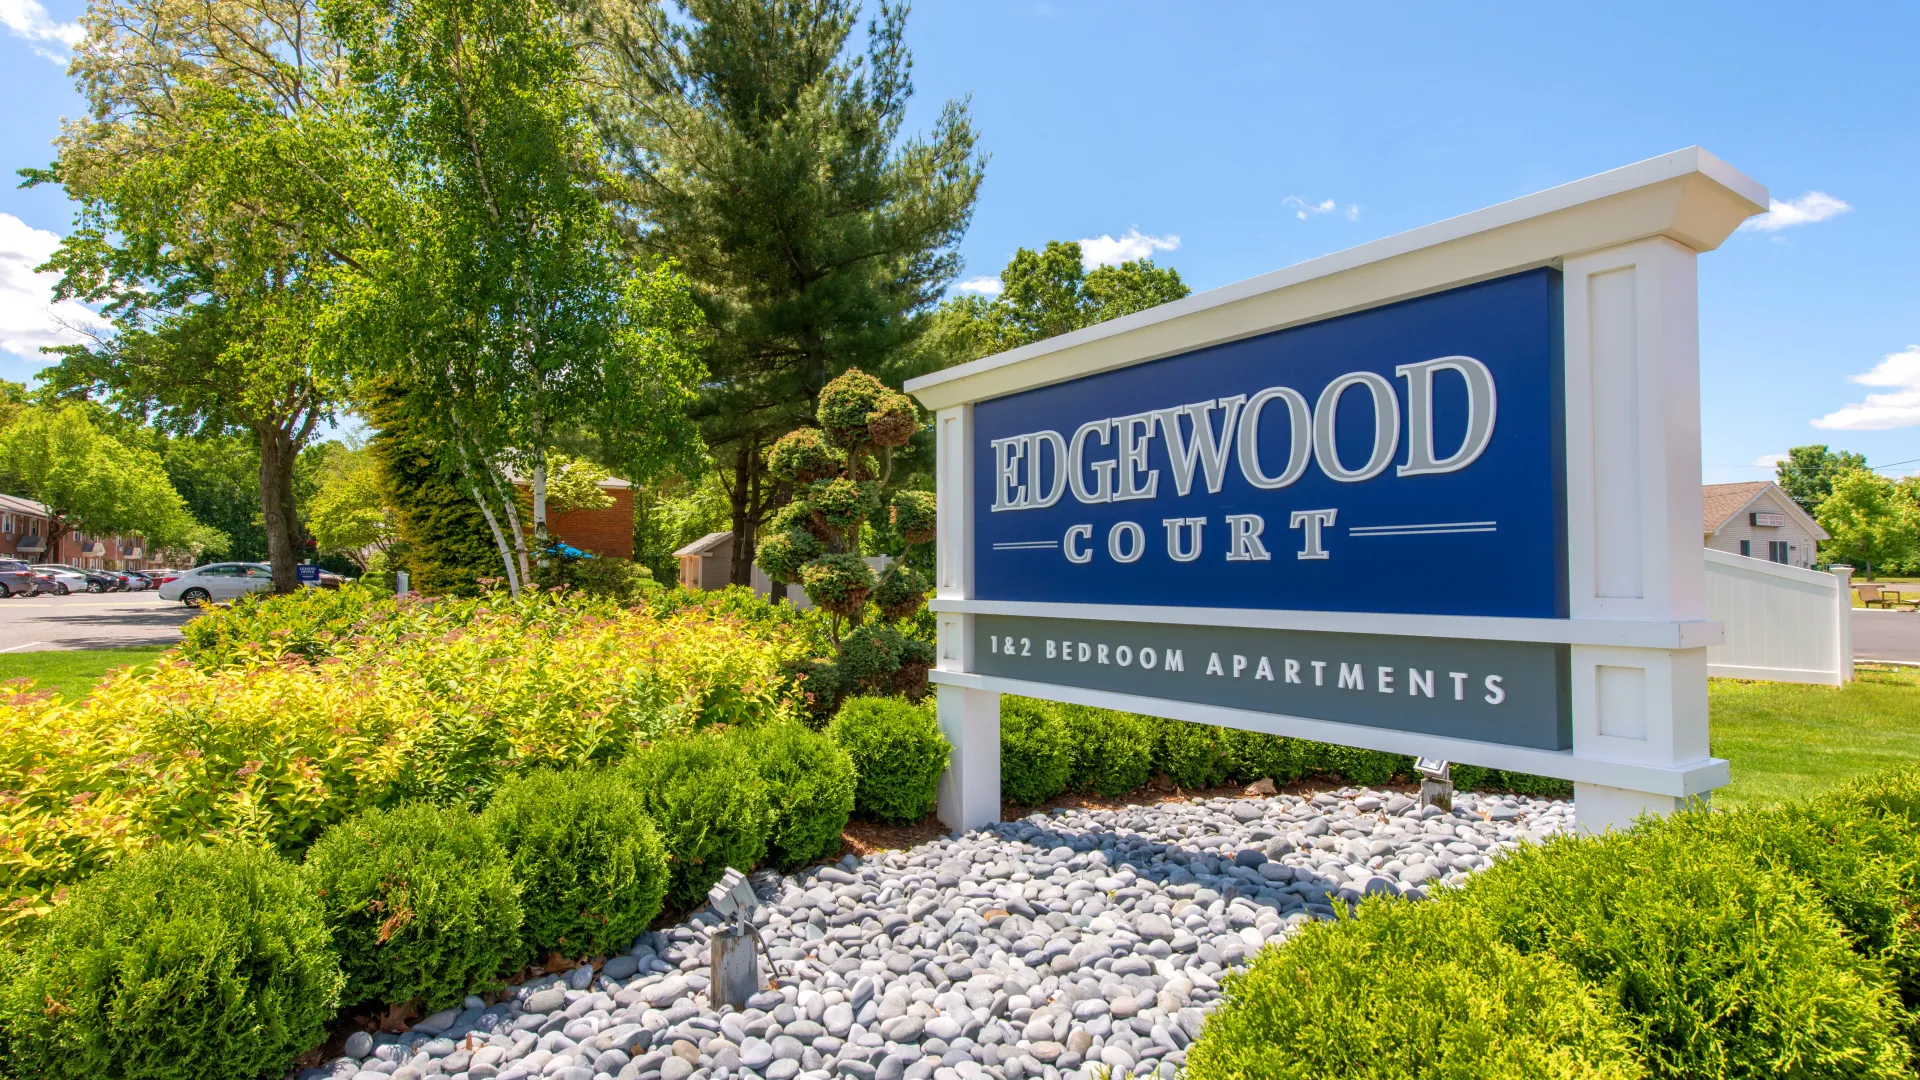 The front sign that reads Edgewood Court, surrounded by lush landscaping, at the front entrance of the apartment community.